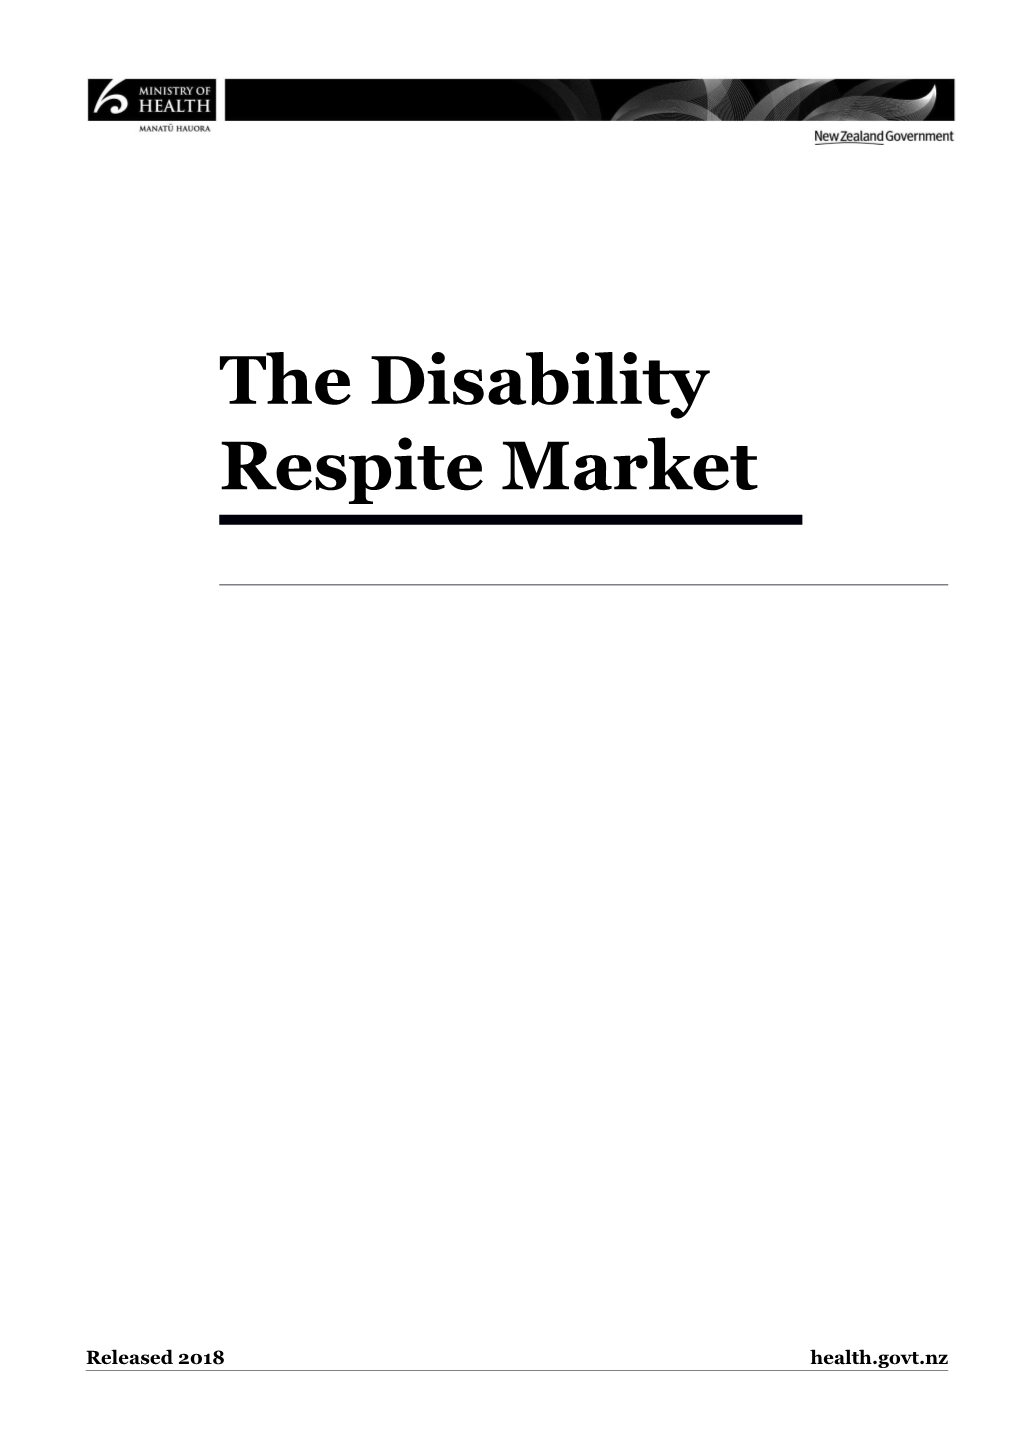 The Disability Respite Market in New Zealand